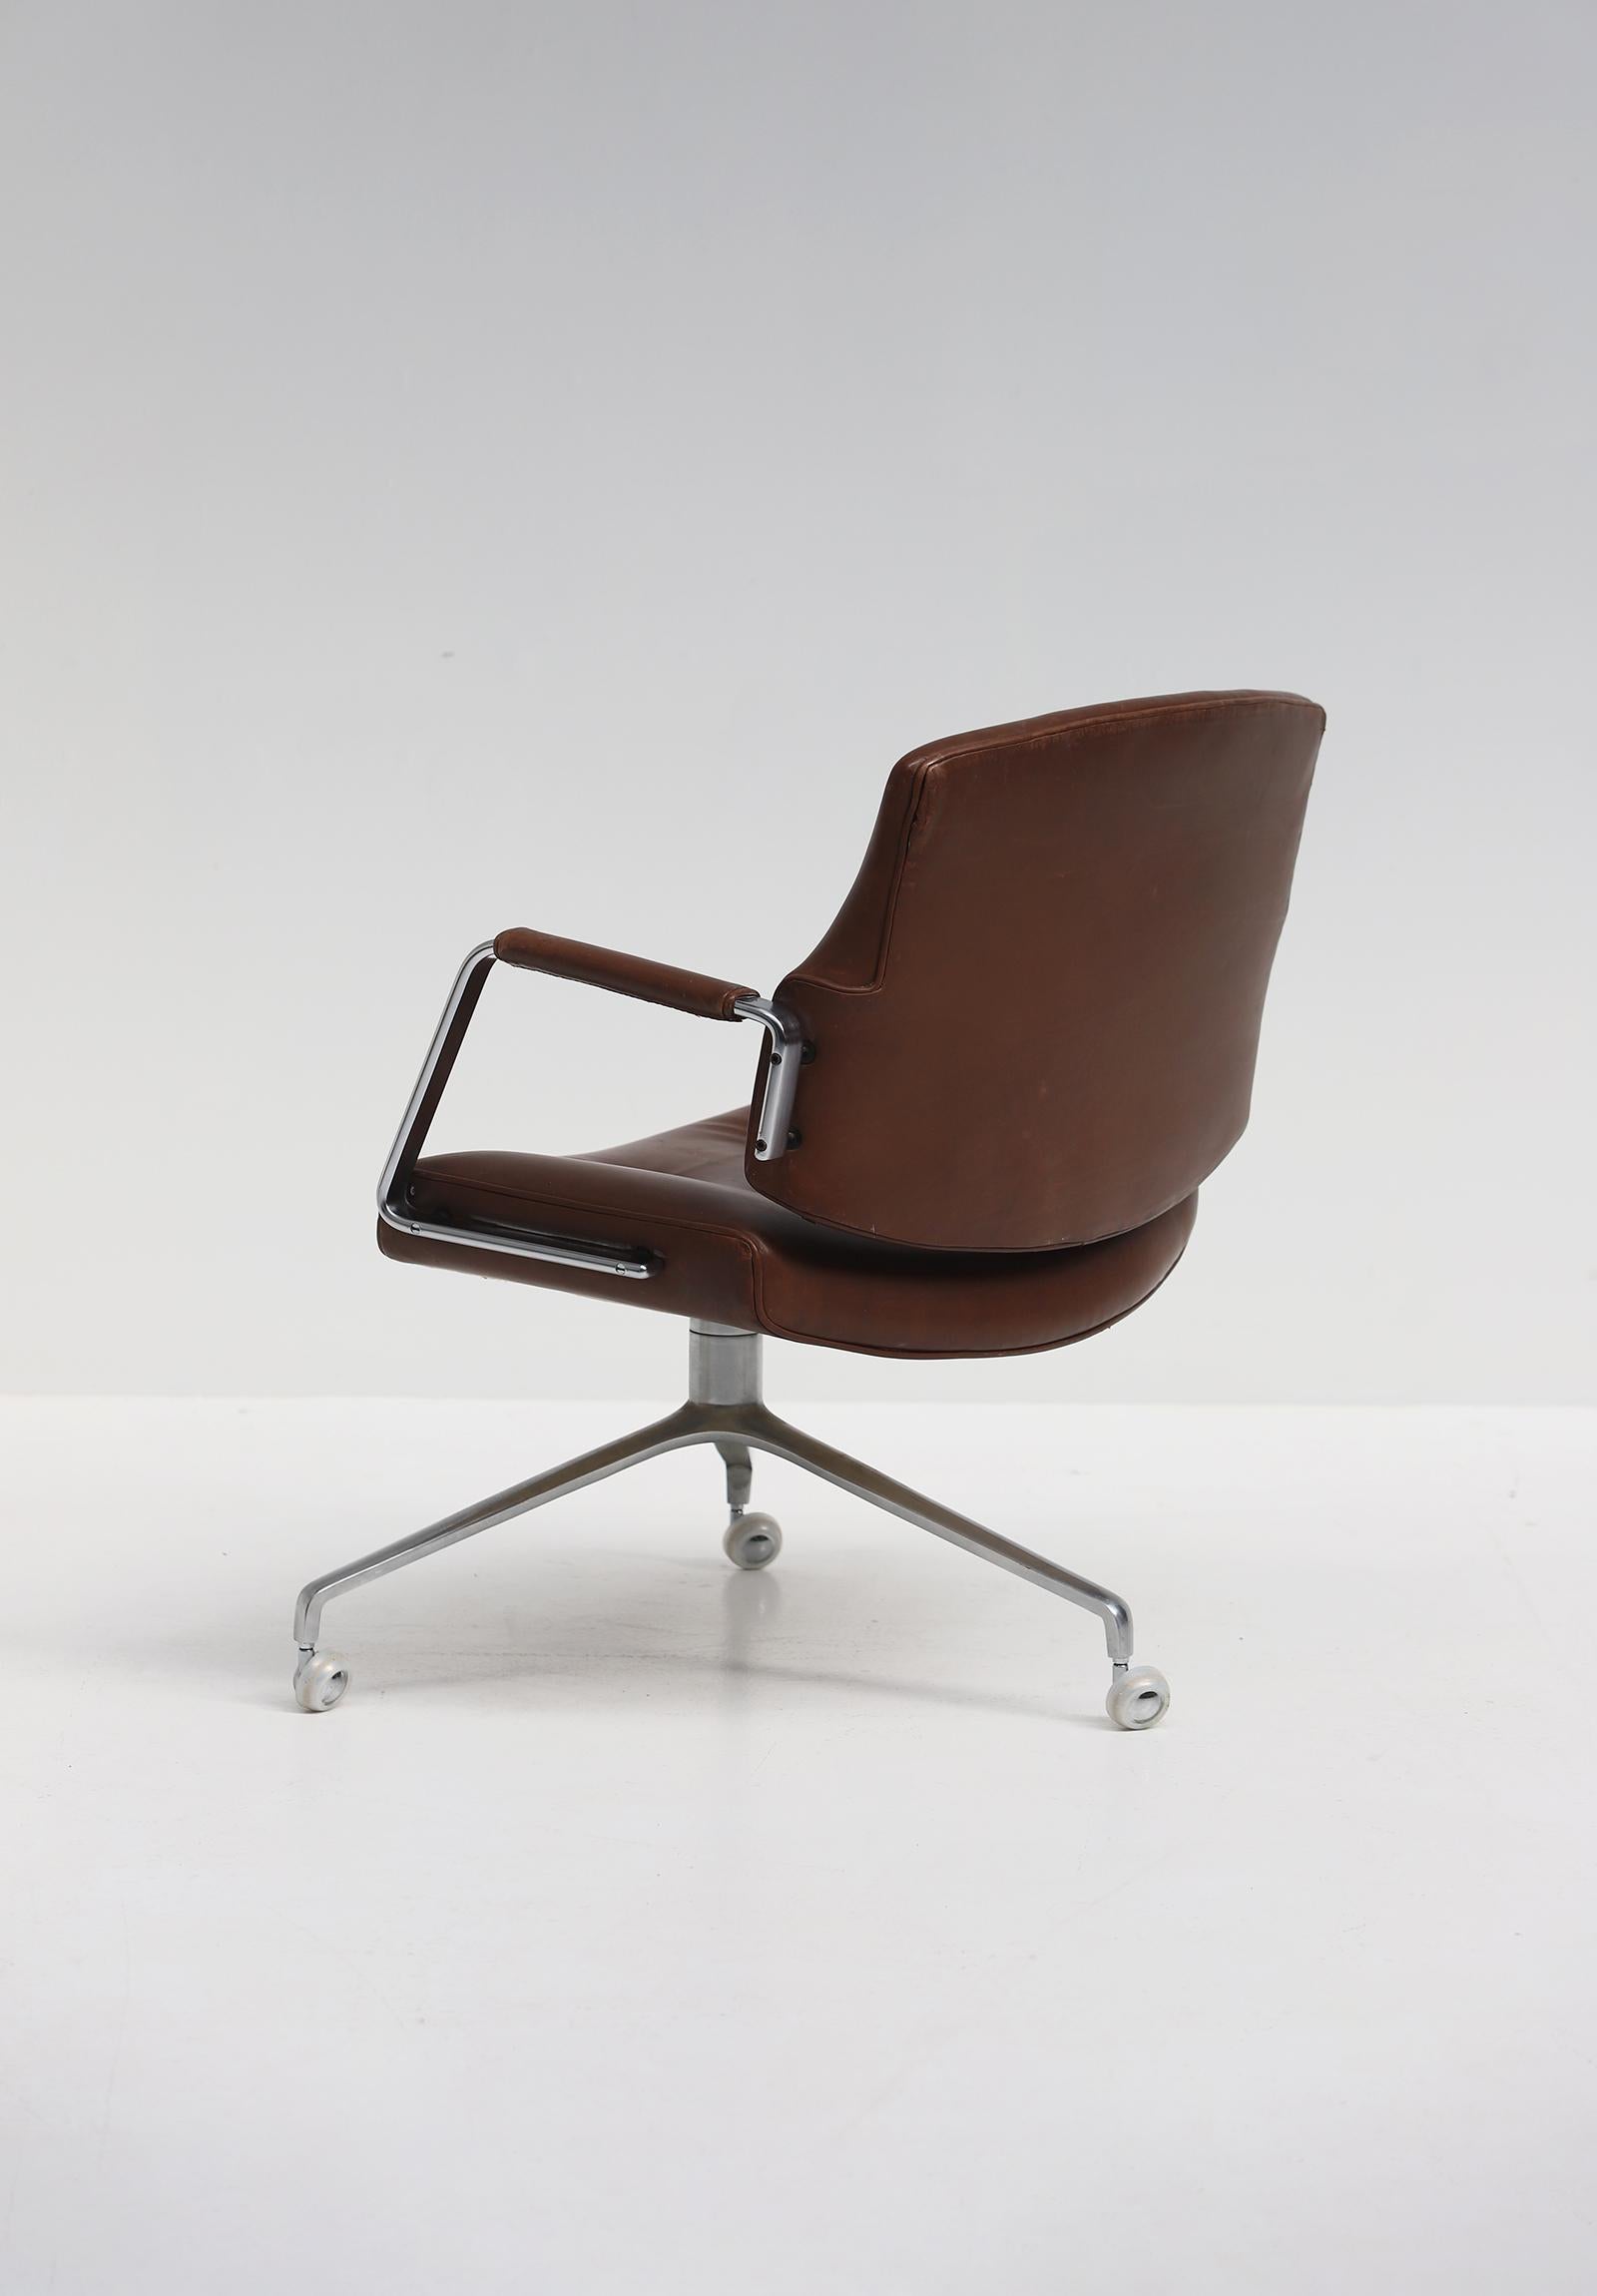 Late 20th Century Fk84 Chocolatebrown Leather Office Chair by Preben Fabricius and Jorgen Kastholm